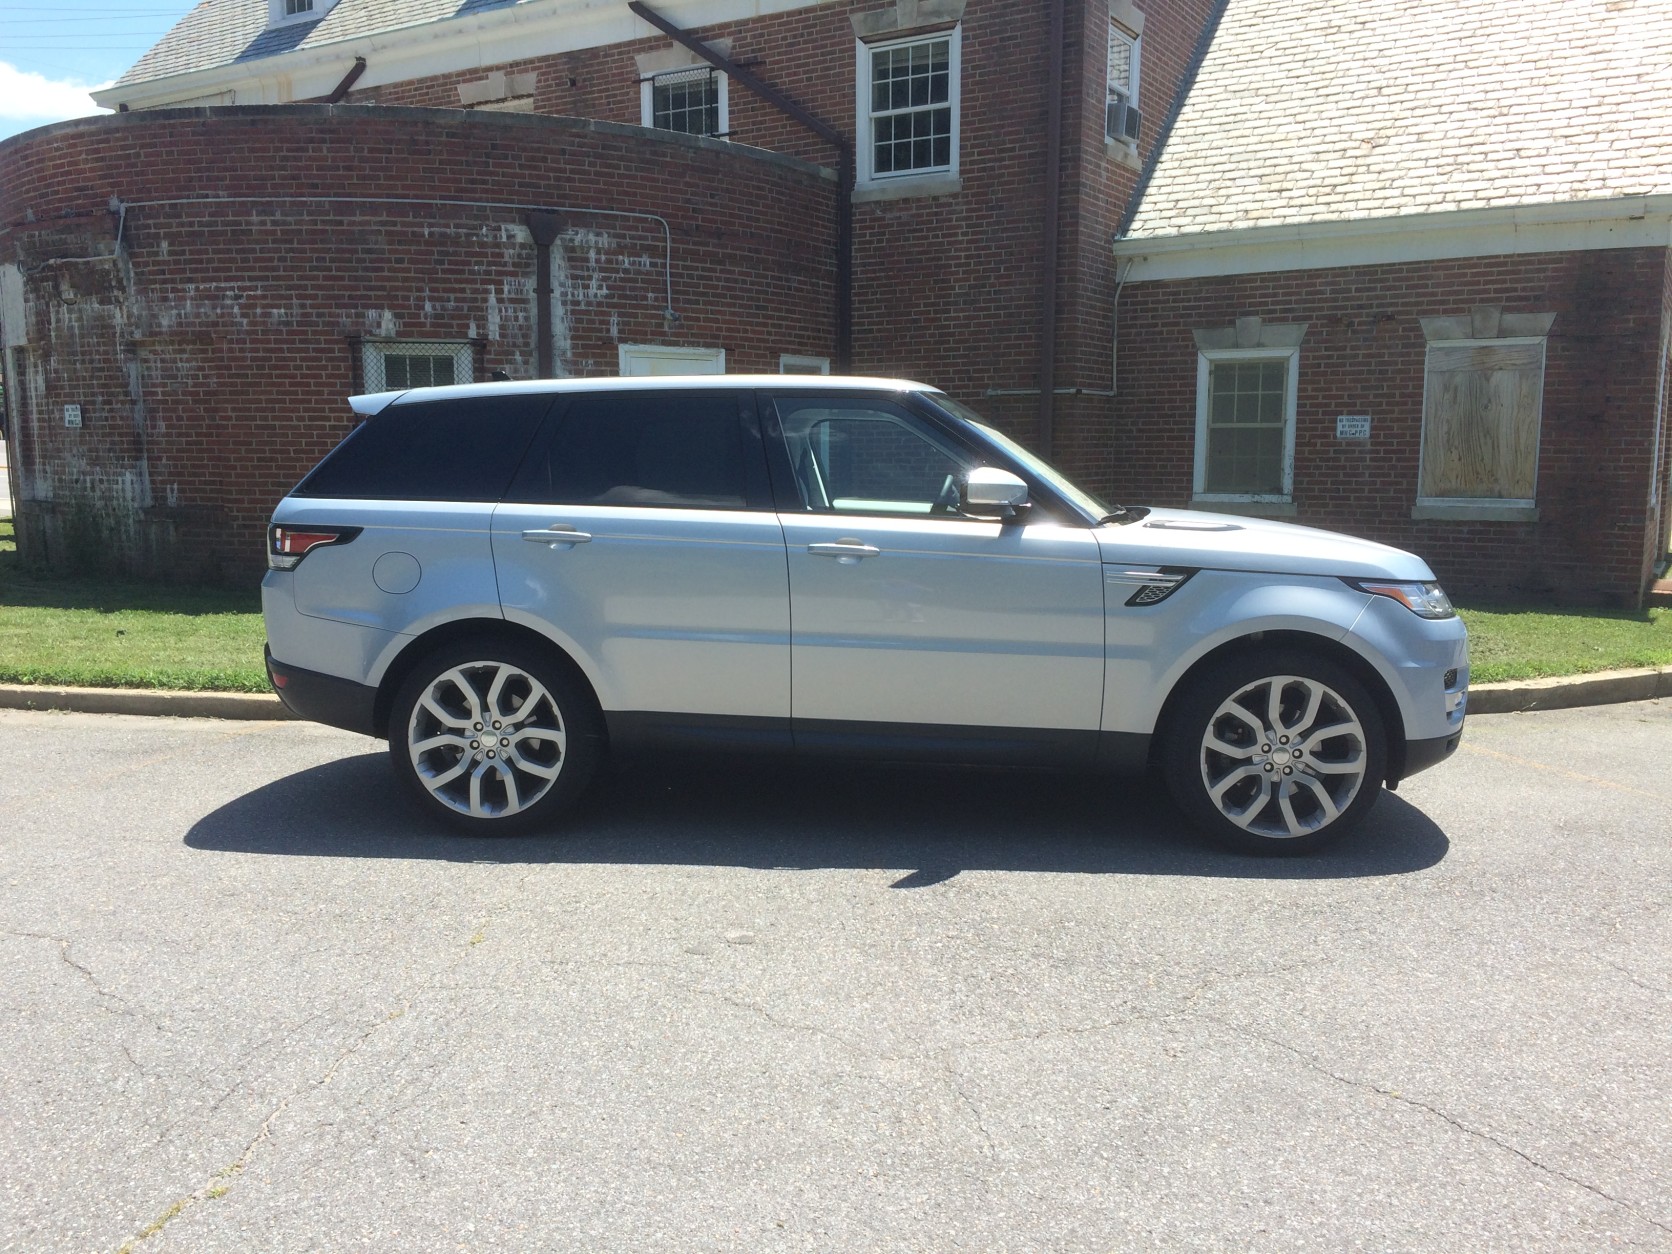 With one glance, you'll know it’s a Range Rover -- just with a modern touch. (WTOP/Mike Parris)